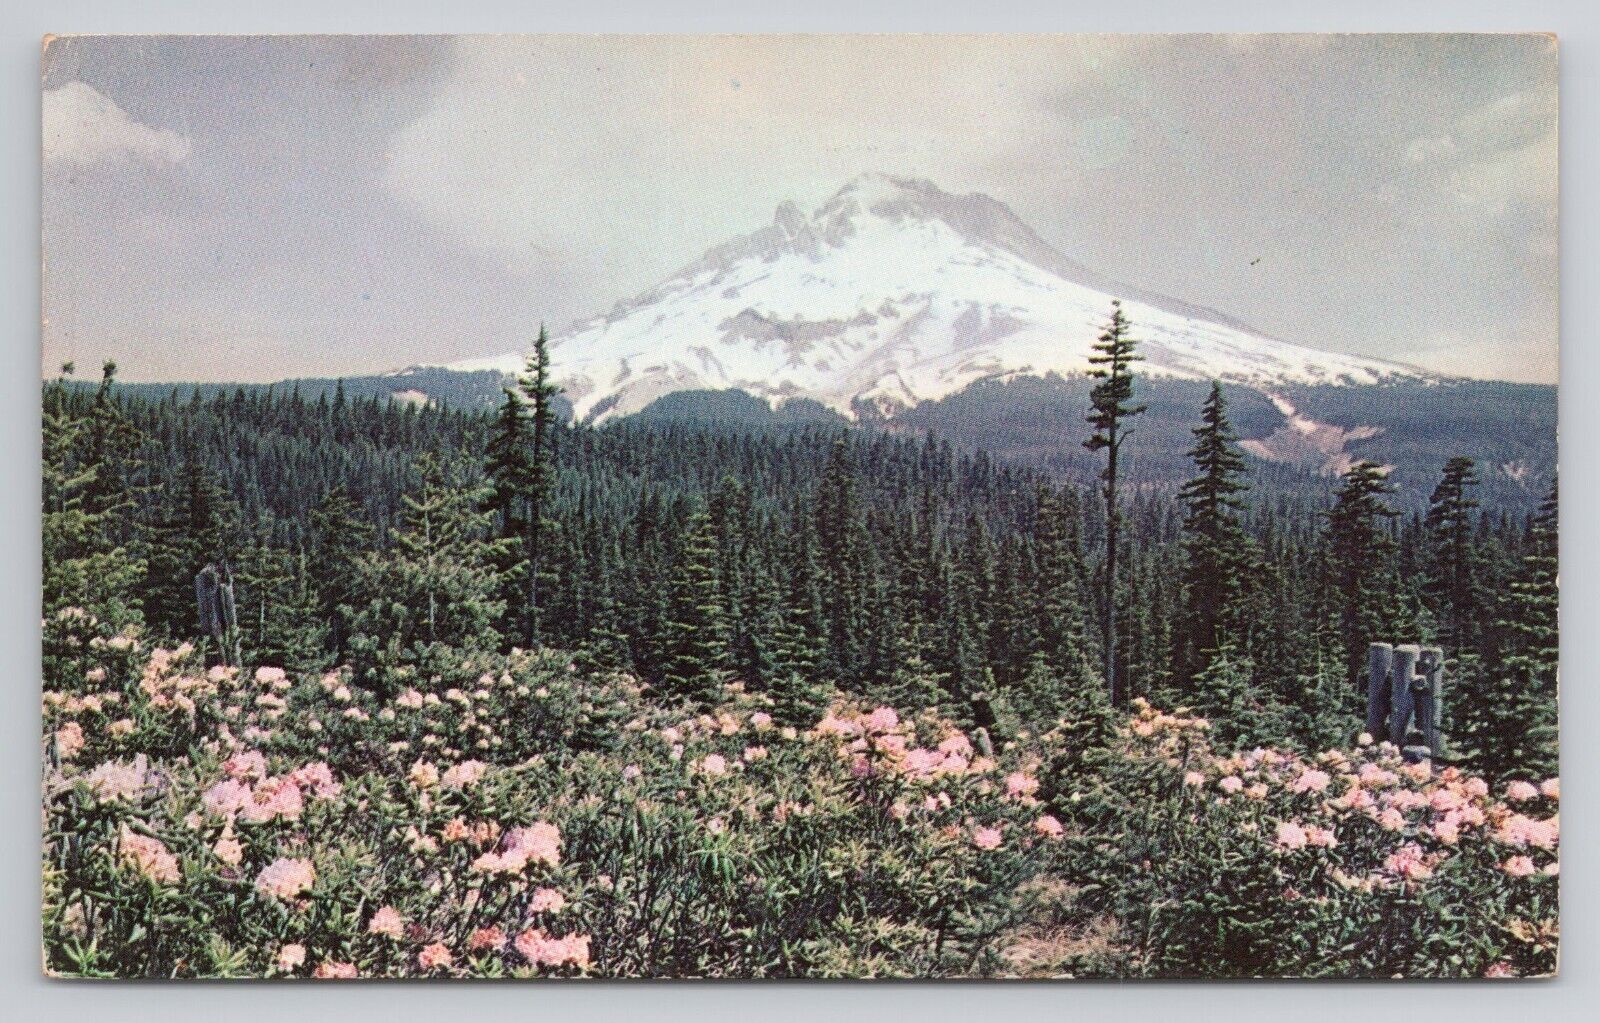 Rhododendron Time At Mt. Hood, Oregon Postcard 3642